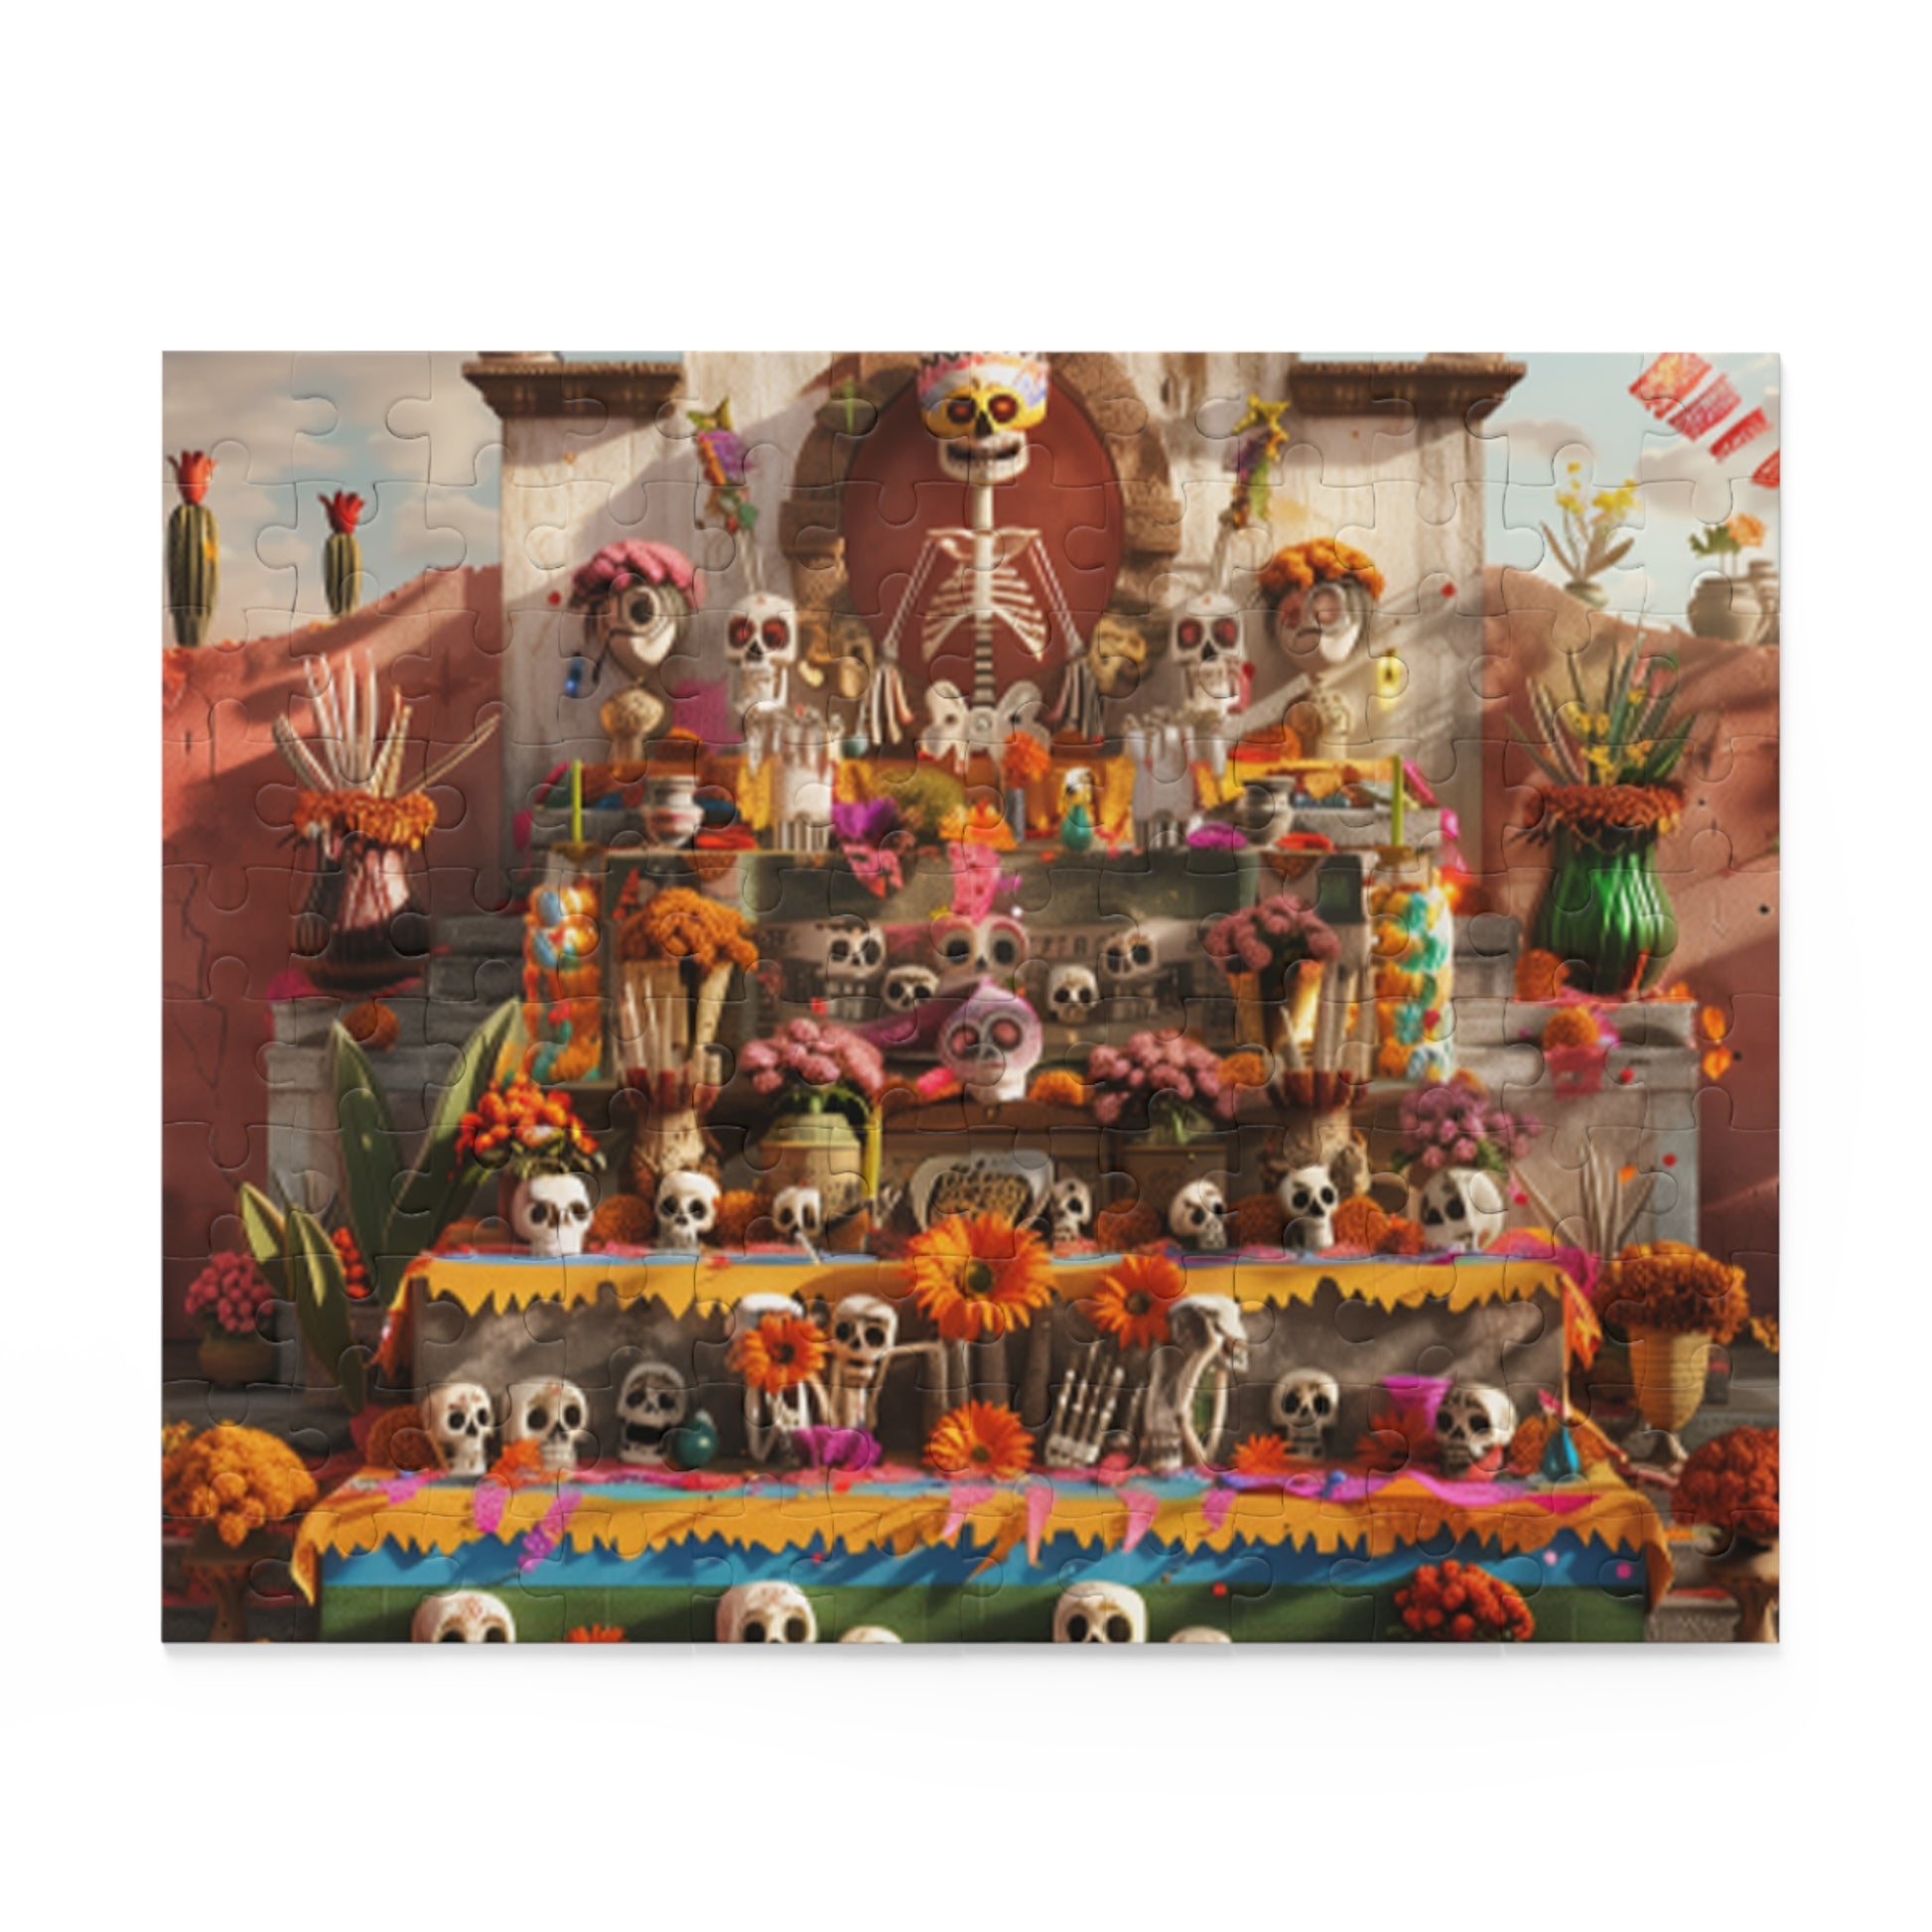 Mexican Art Day of the Dead Día de Muertos Jigsaw Puzzle Adult Birthday Business Jigsaw Puzzle Gift for Him Funny Humorous Indoor Outdoor Game Gift For Her Online-2